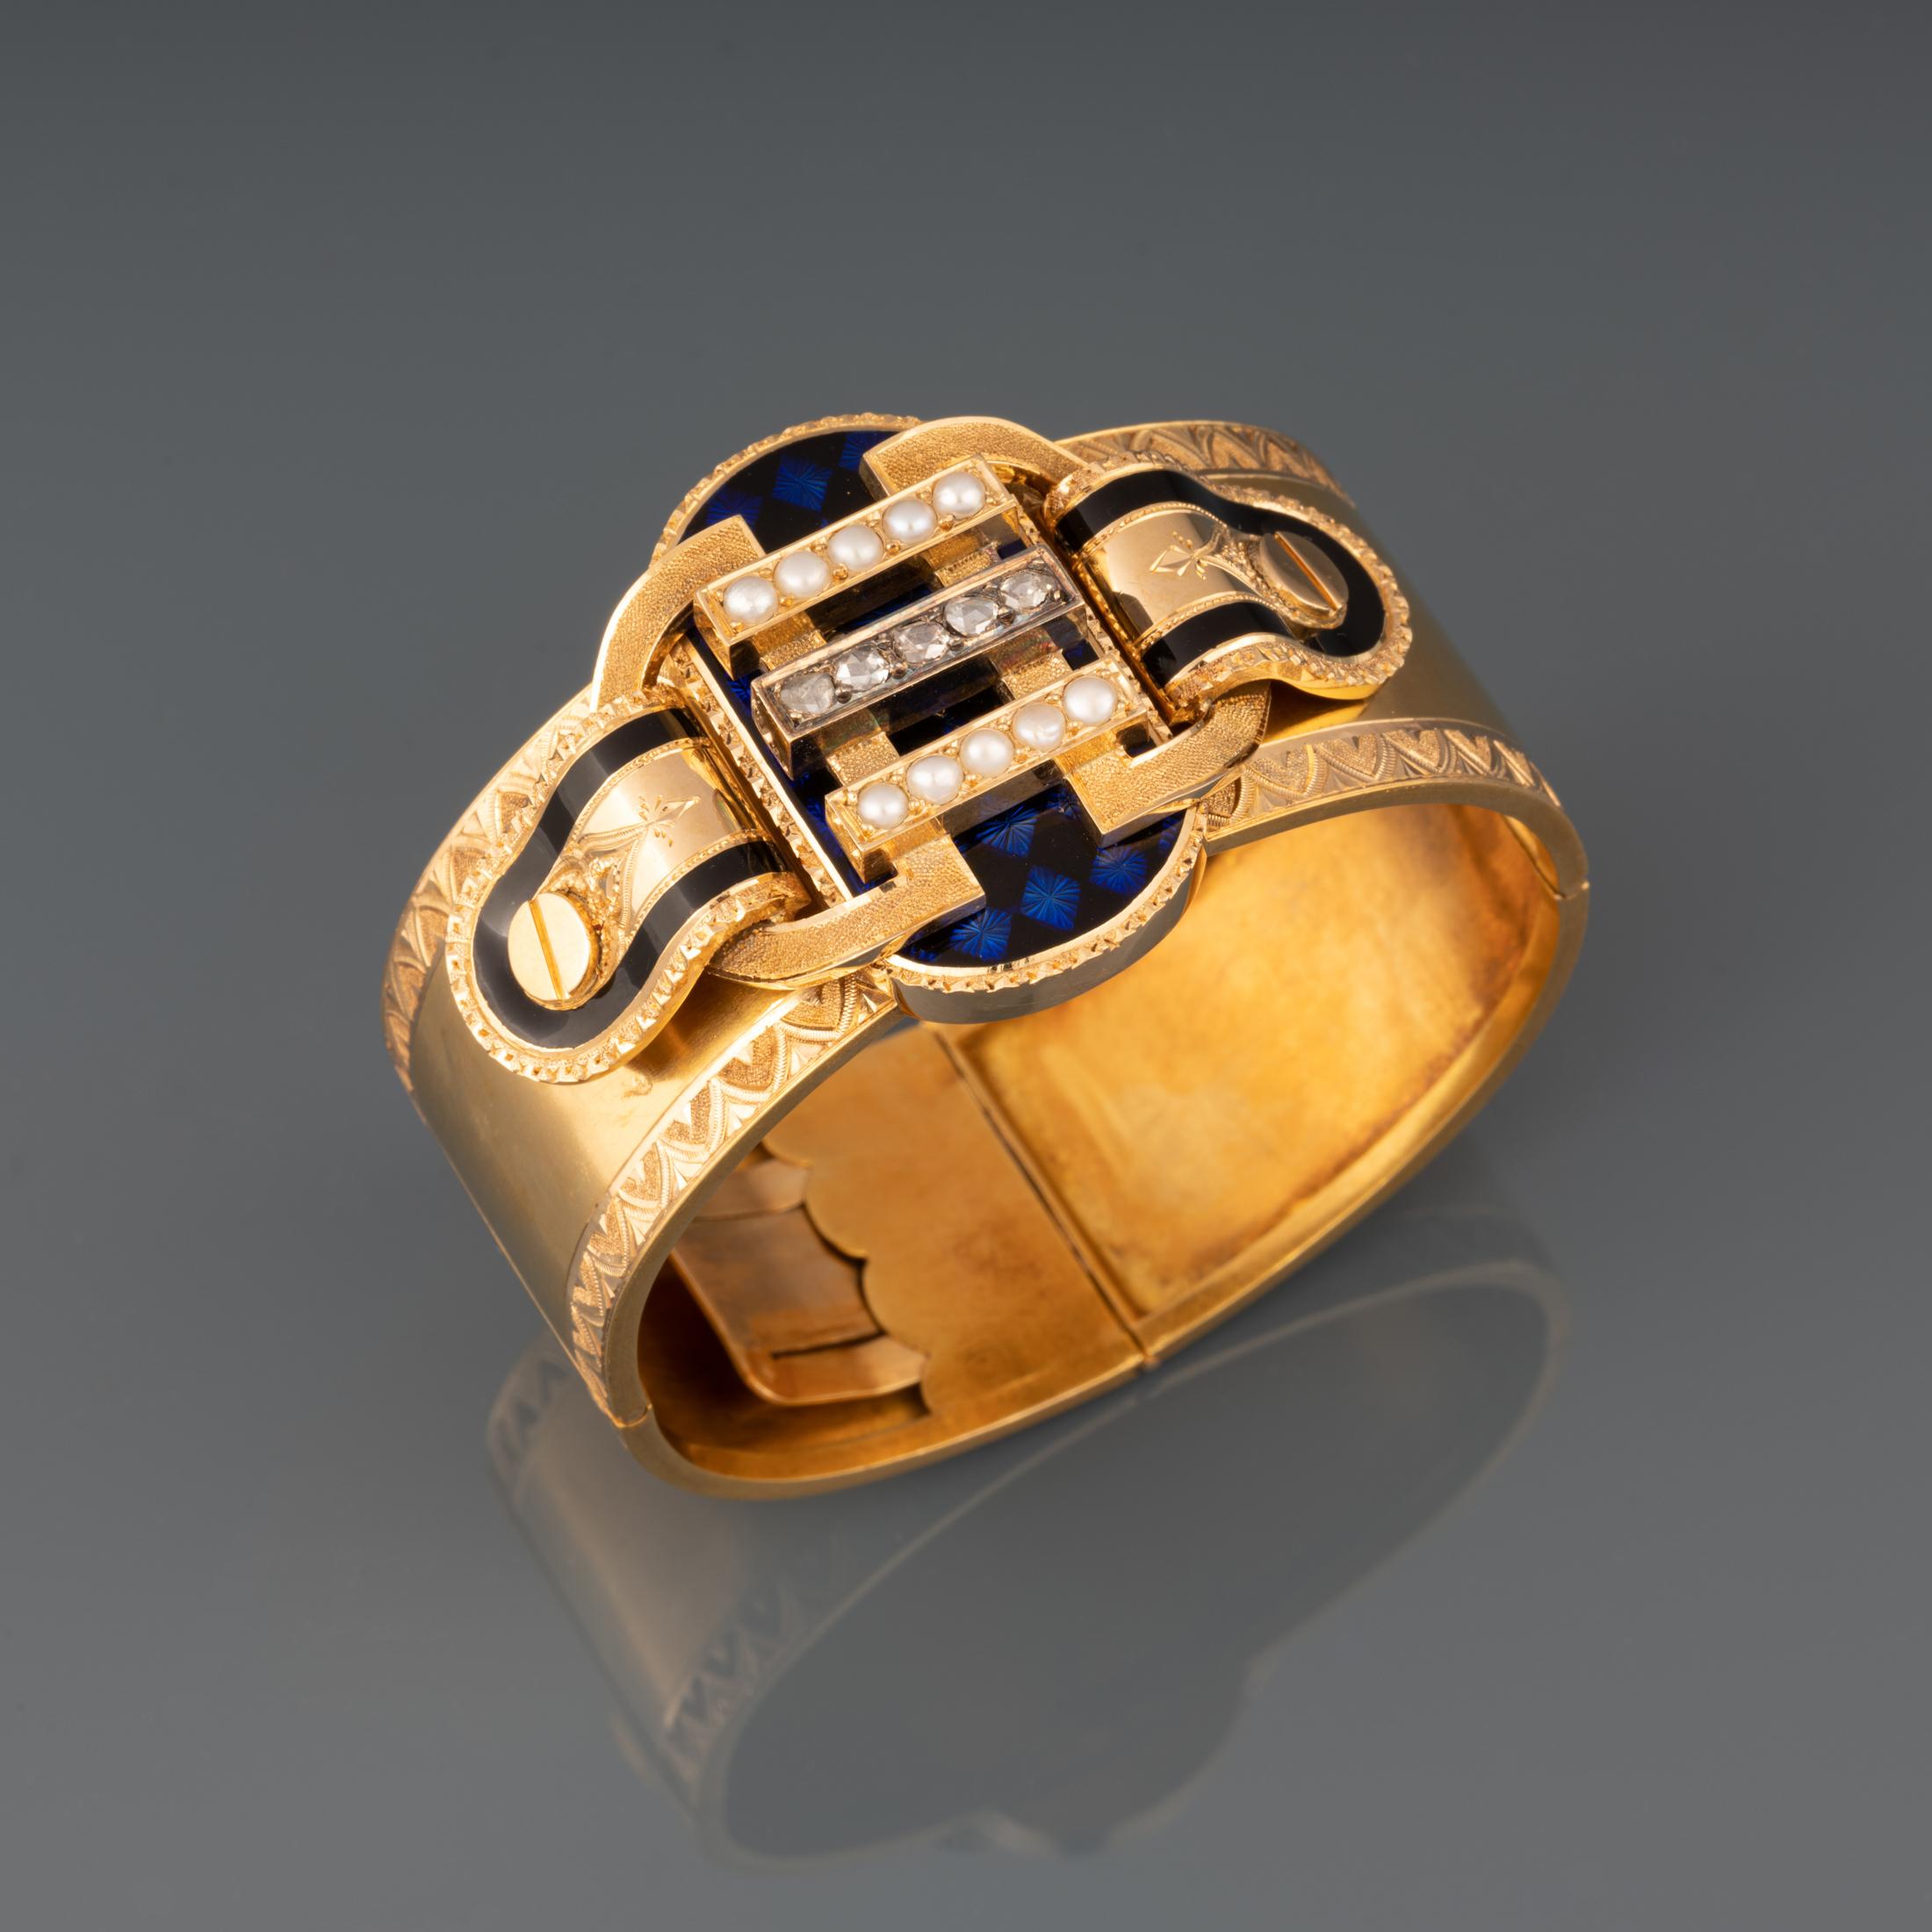 A very beautiful antique bracelet, made in France circa 1850. Made in yellow gold 18l, set with diamonds and pearls, painted with blue and black enamel.

French hallmarks for gold 18k: eagle head and Rhino head. Hallmark of maker (Unknown).

The